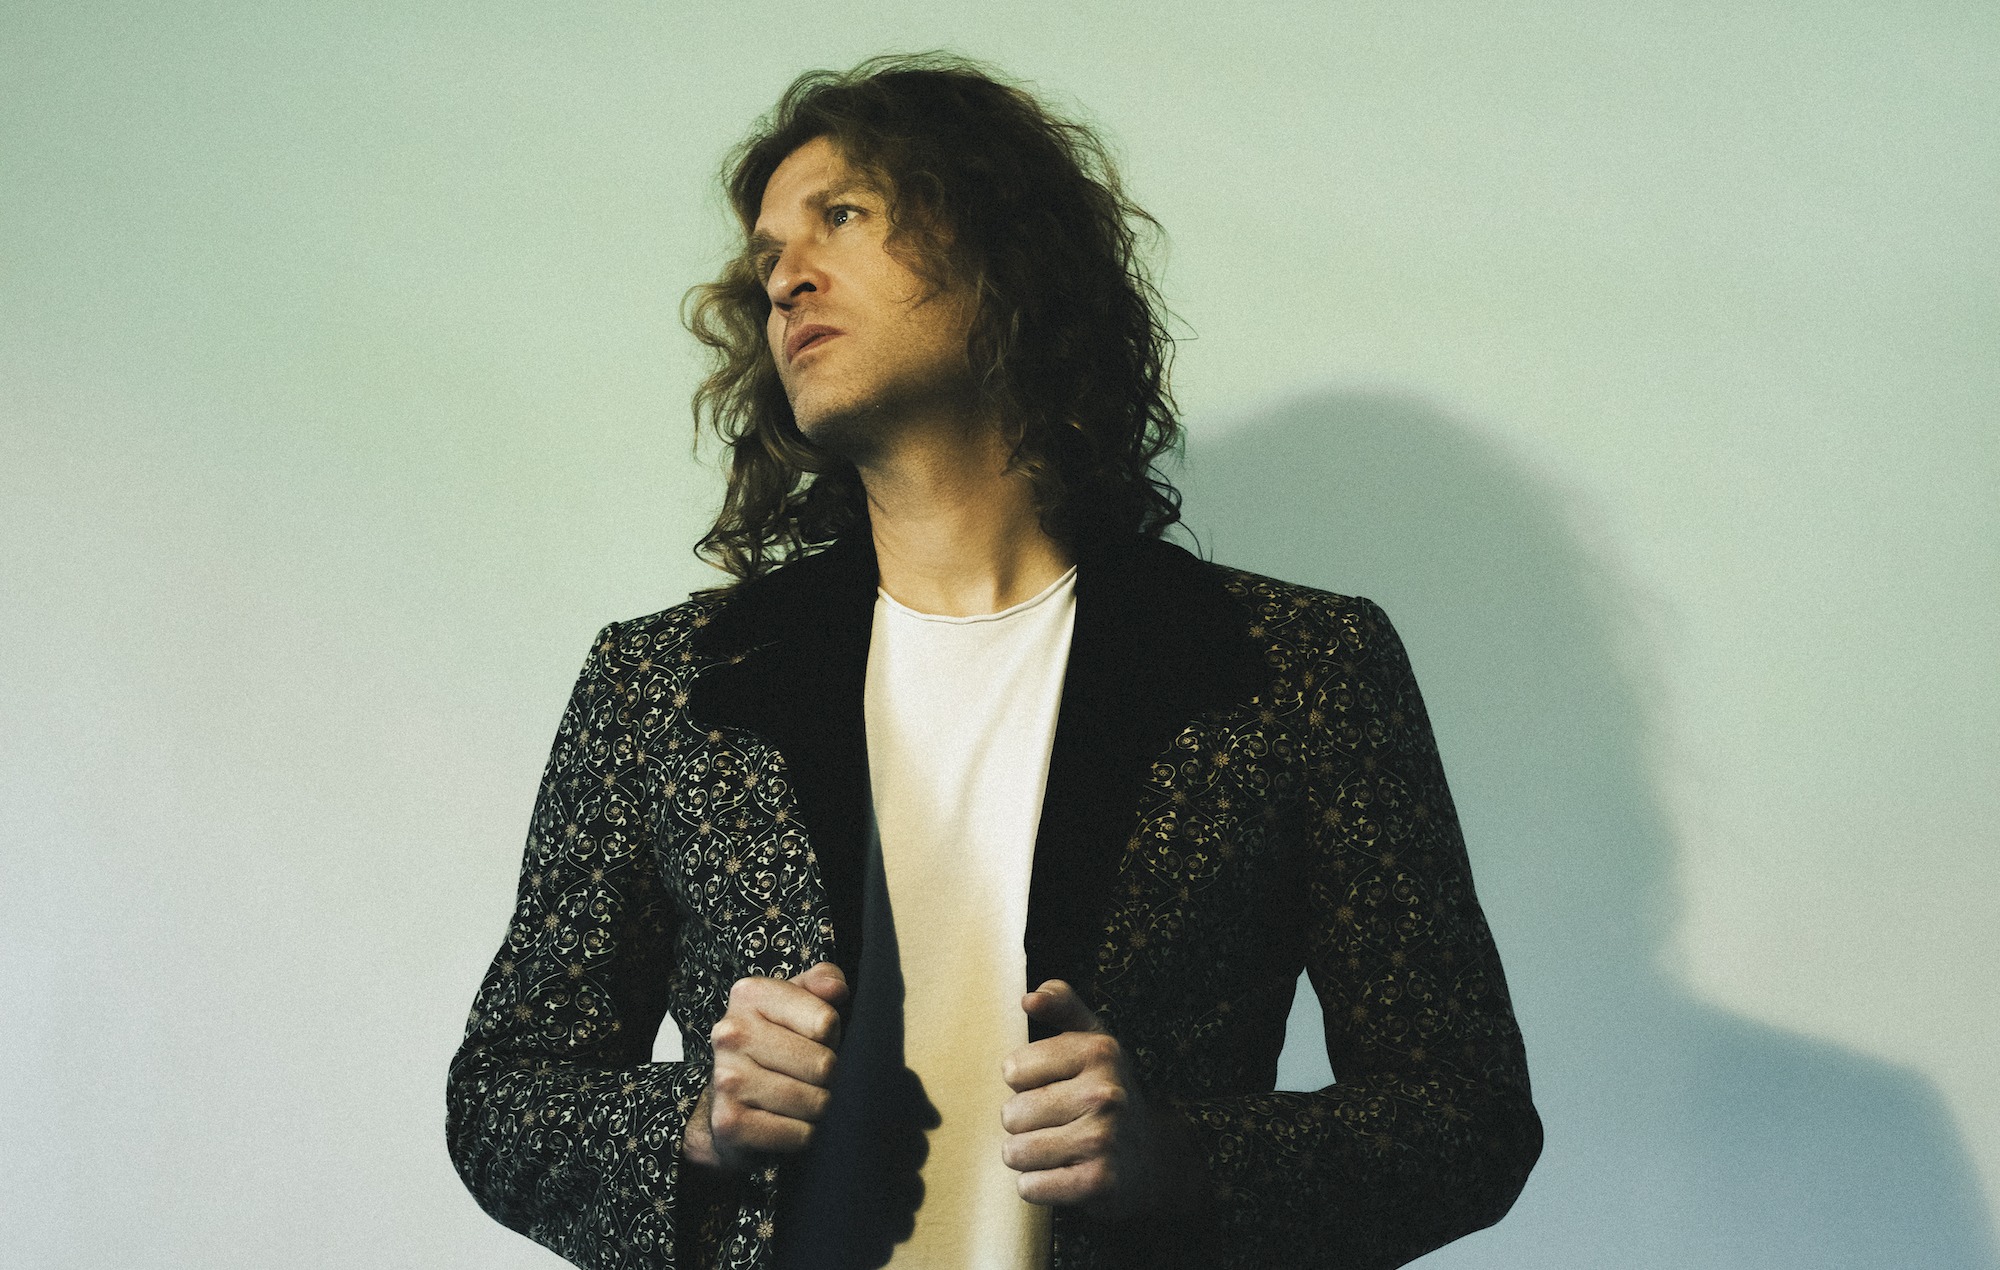 Five things we learned from our In Conversation video chat with Dave Keuning